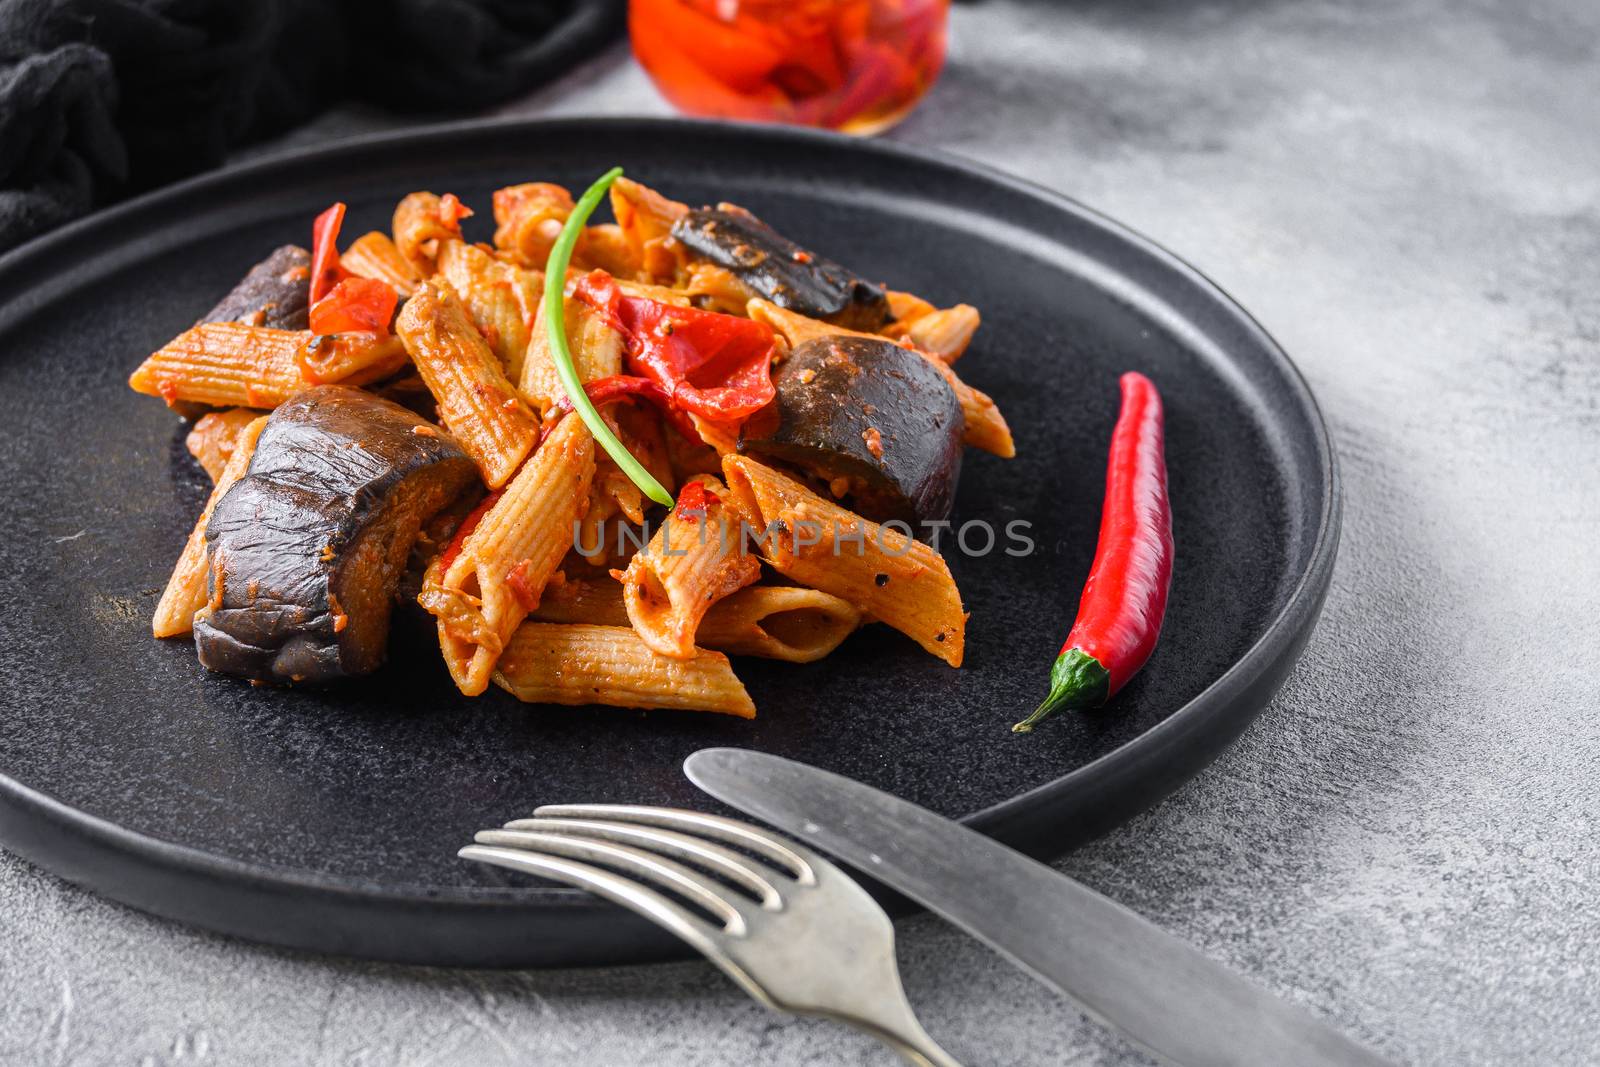 Aubergine penne eggplant pasta, pepper tomatoe sauce, on black plate overgrey concrete background served side view